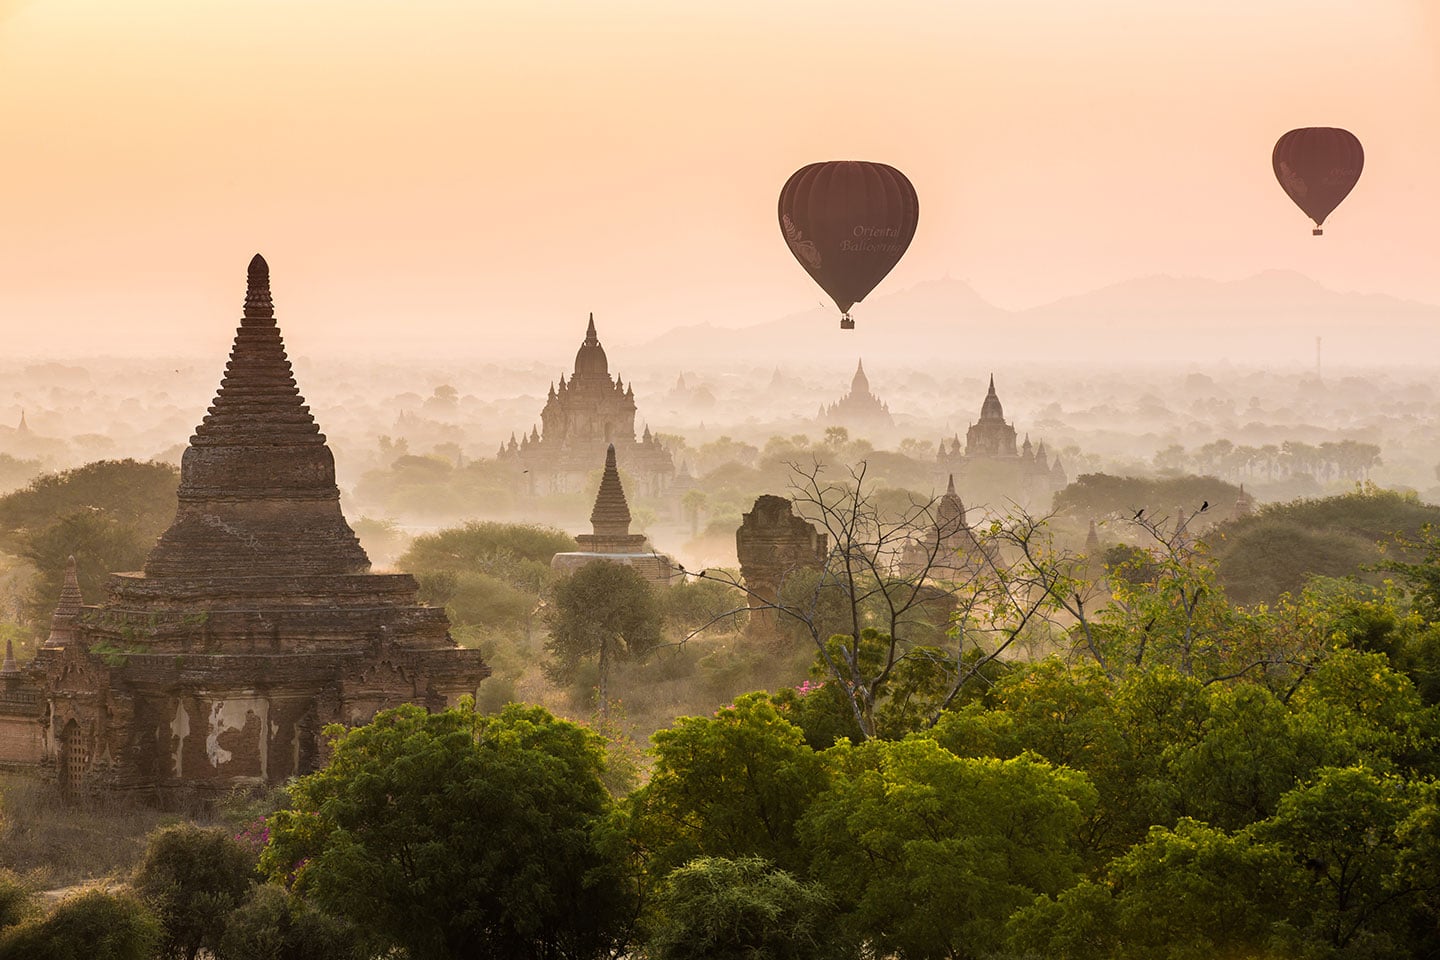 Misty sunrise over the temples of Bagan in Myanmar